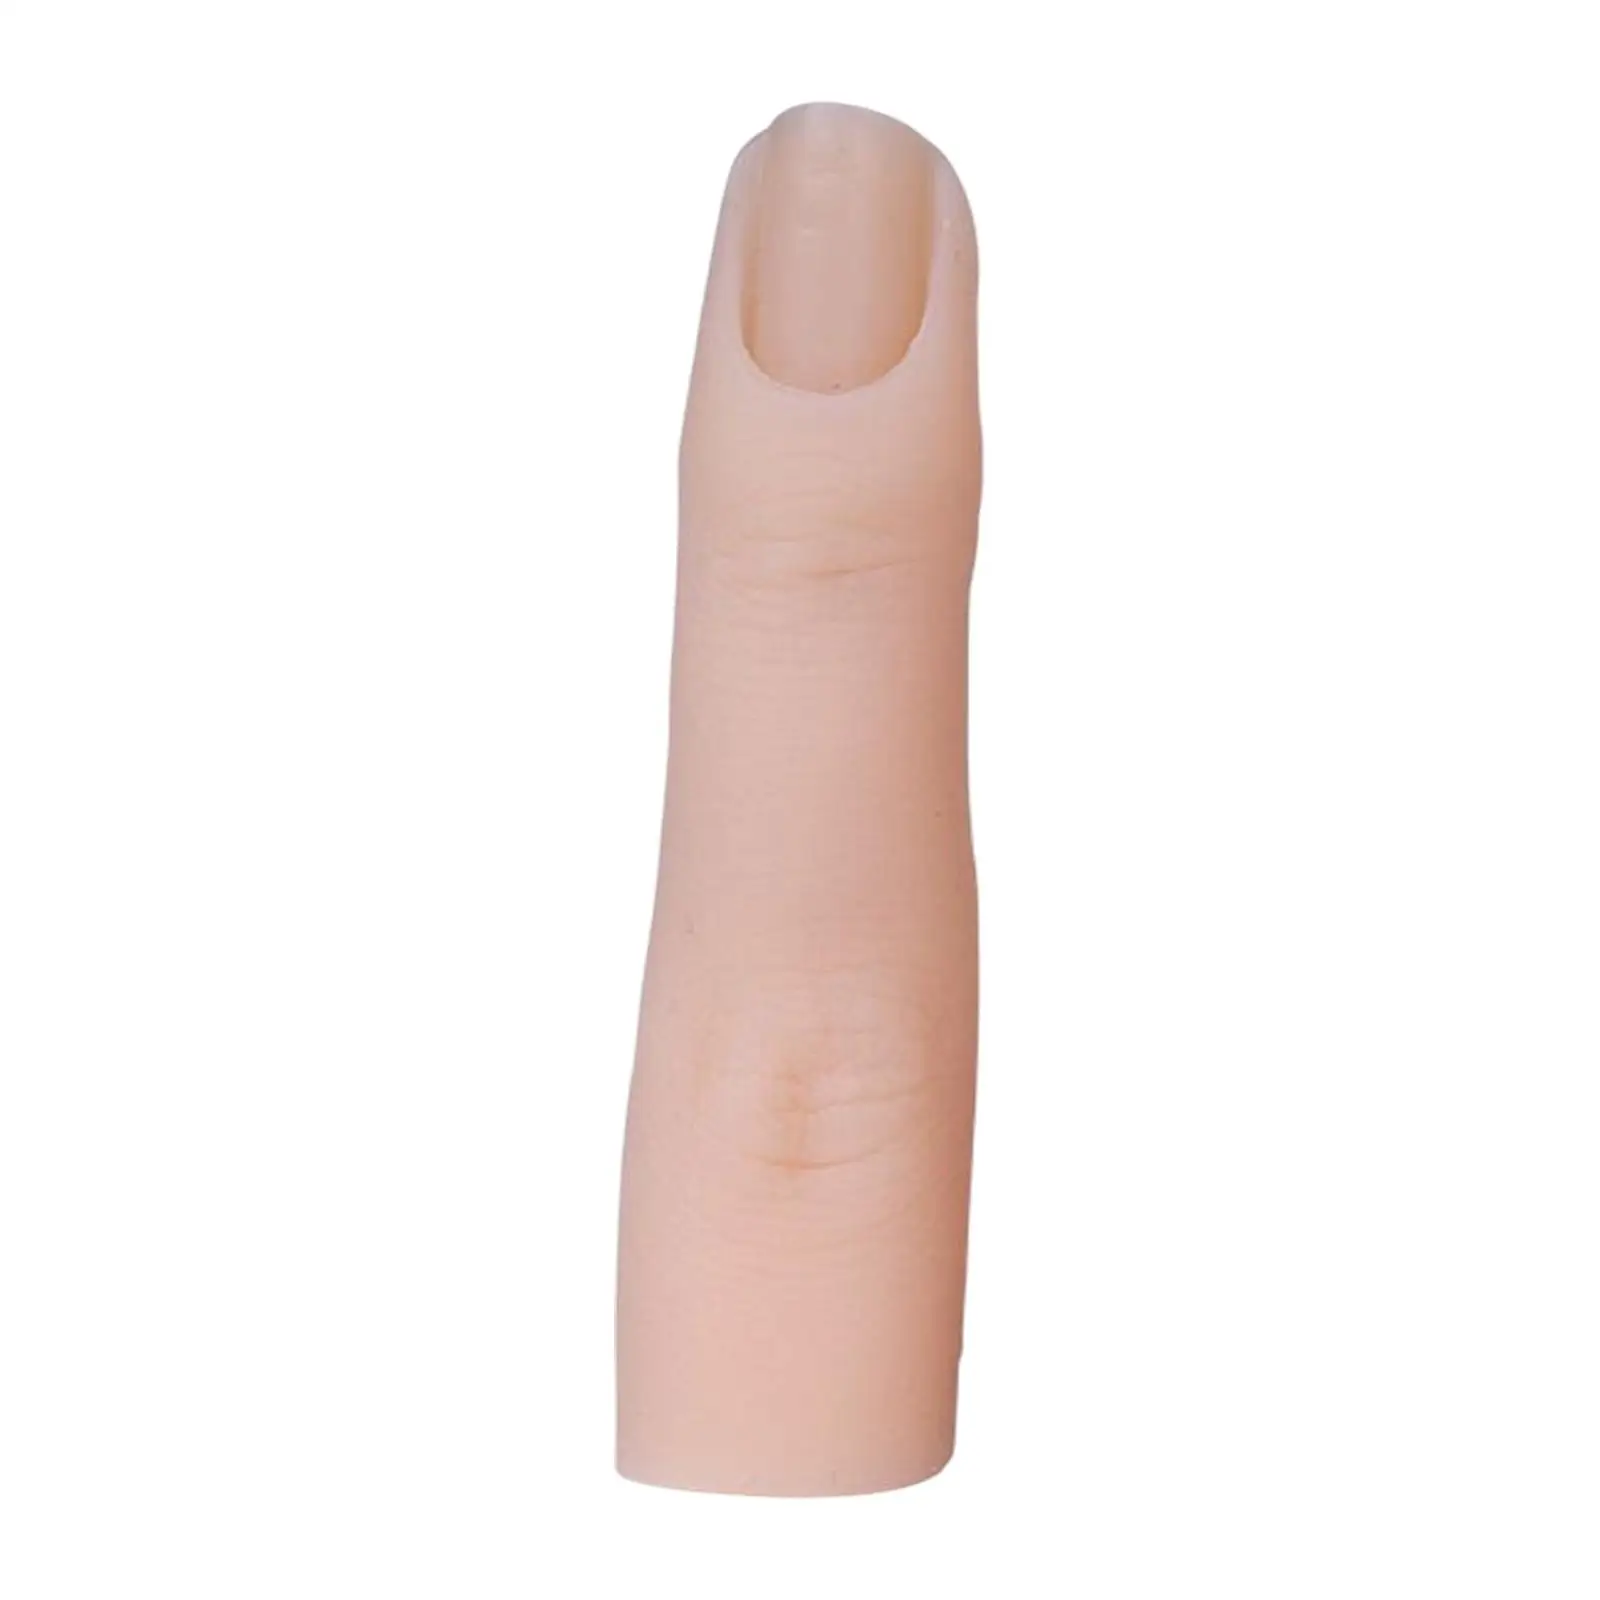 Silicone Nail Finger Model Tool Fake Finger Training Accesories Professional Finger Model DIY Bendable for Training Practicing